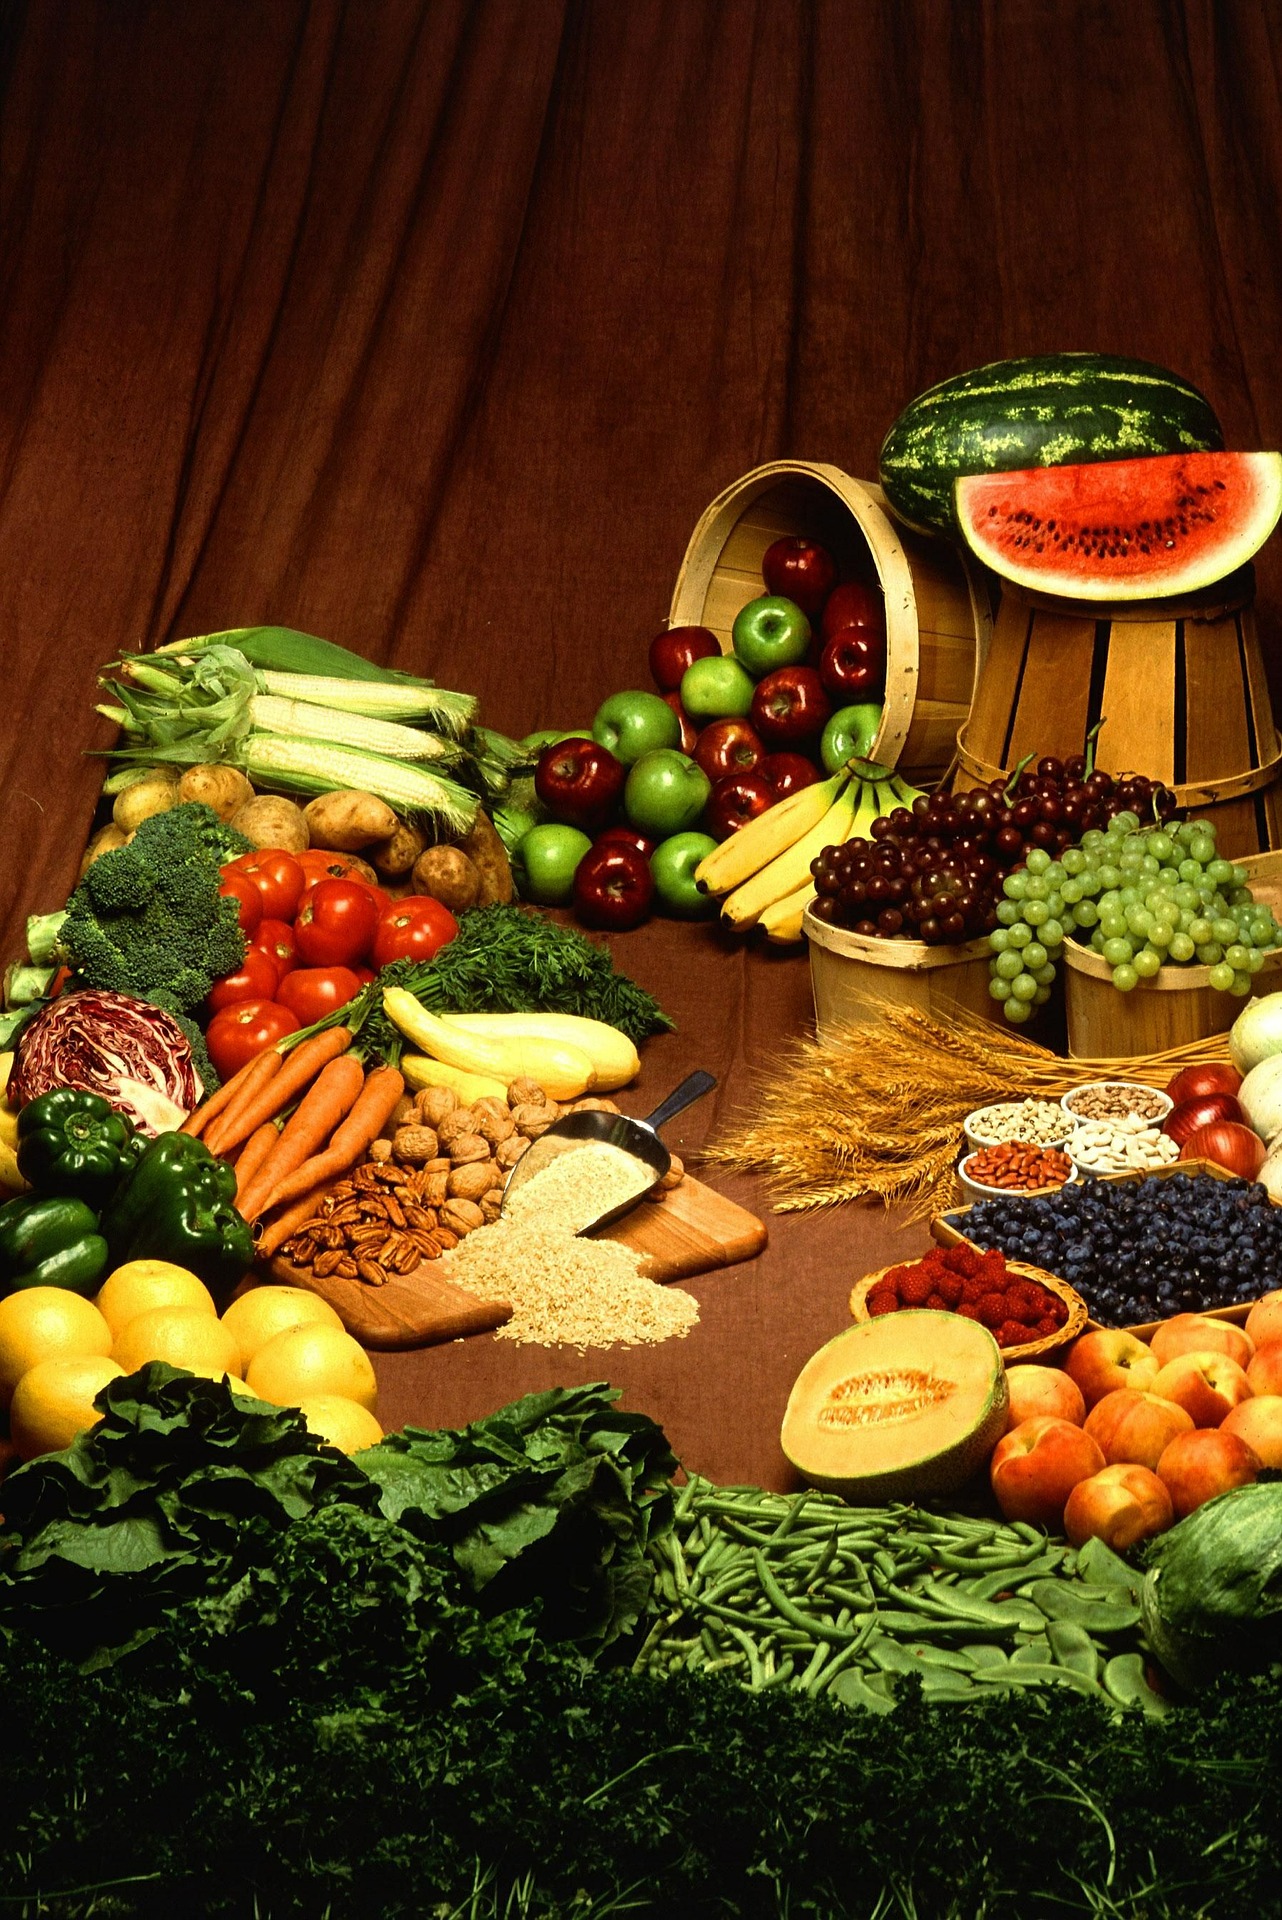 Start today to incorporate more fruits, vegetables and whole grains into your diet. (NDSU photo)